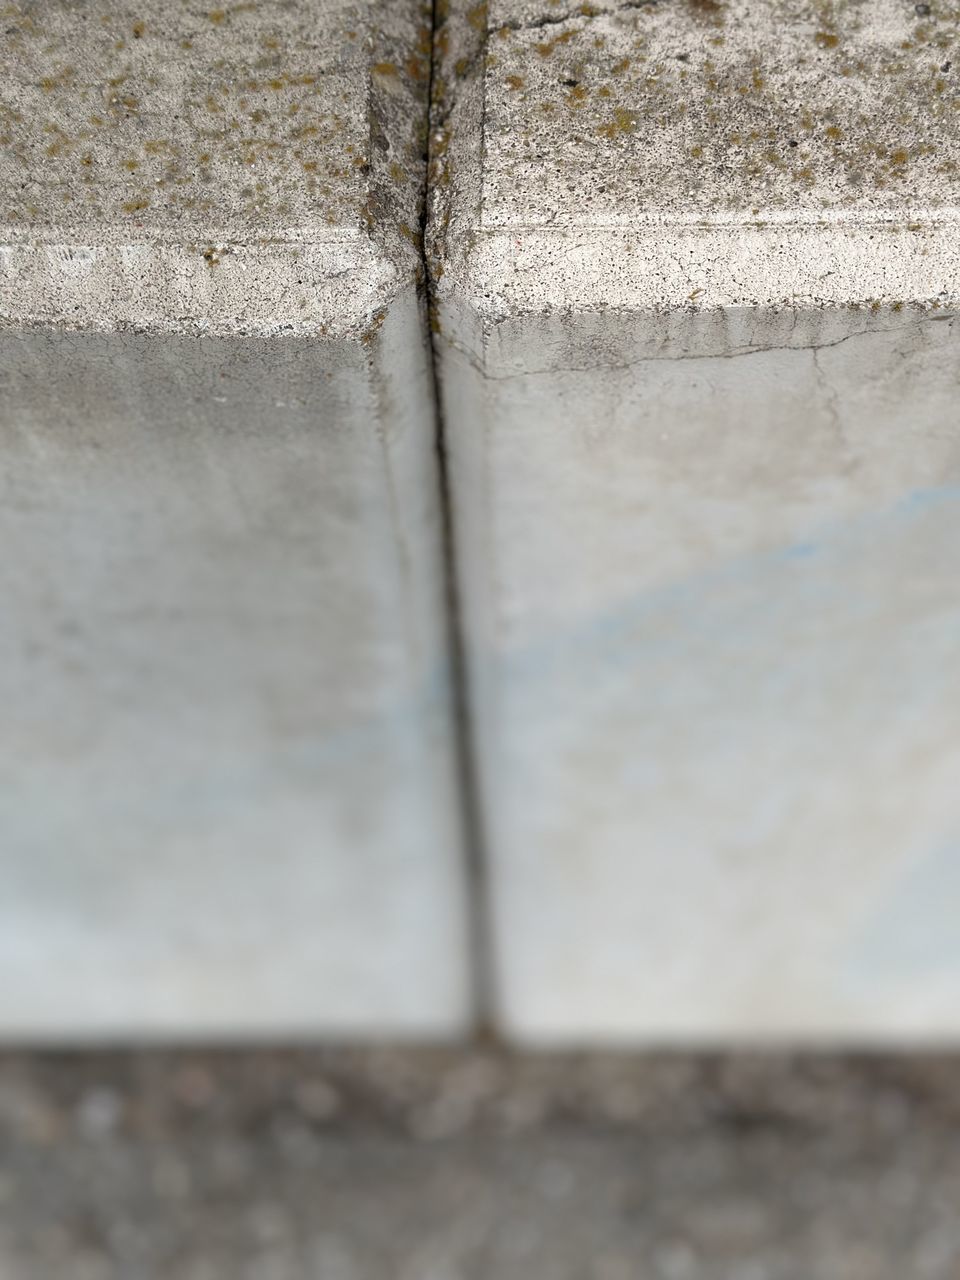 wall, no people, white, day, close-up, wood, floor, architecture, wall - building feature, built structure, textured, selective focus, outdoors, flooring, concrete, nature, full frame, pattern, high angle view, water, backgrounds, reflection